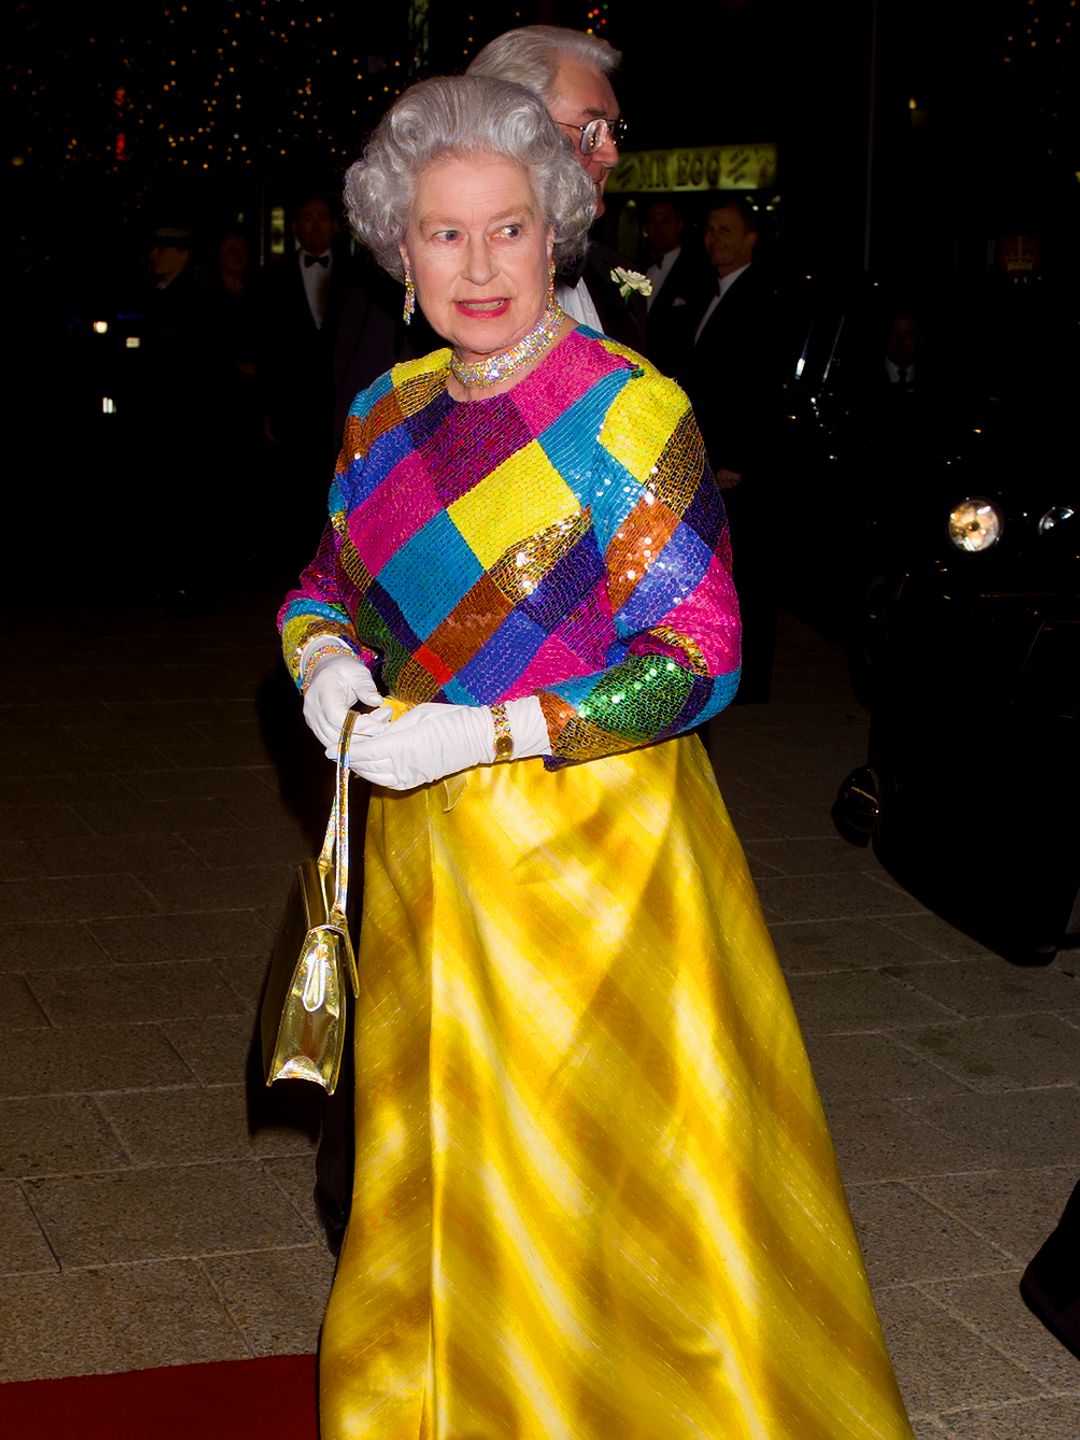 queen wearing bright dress on red carpet